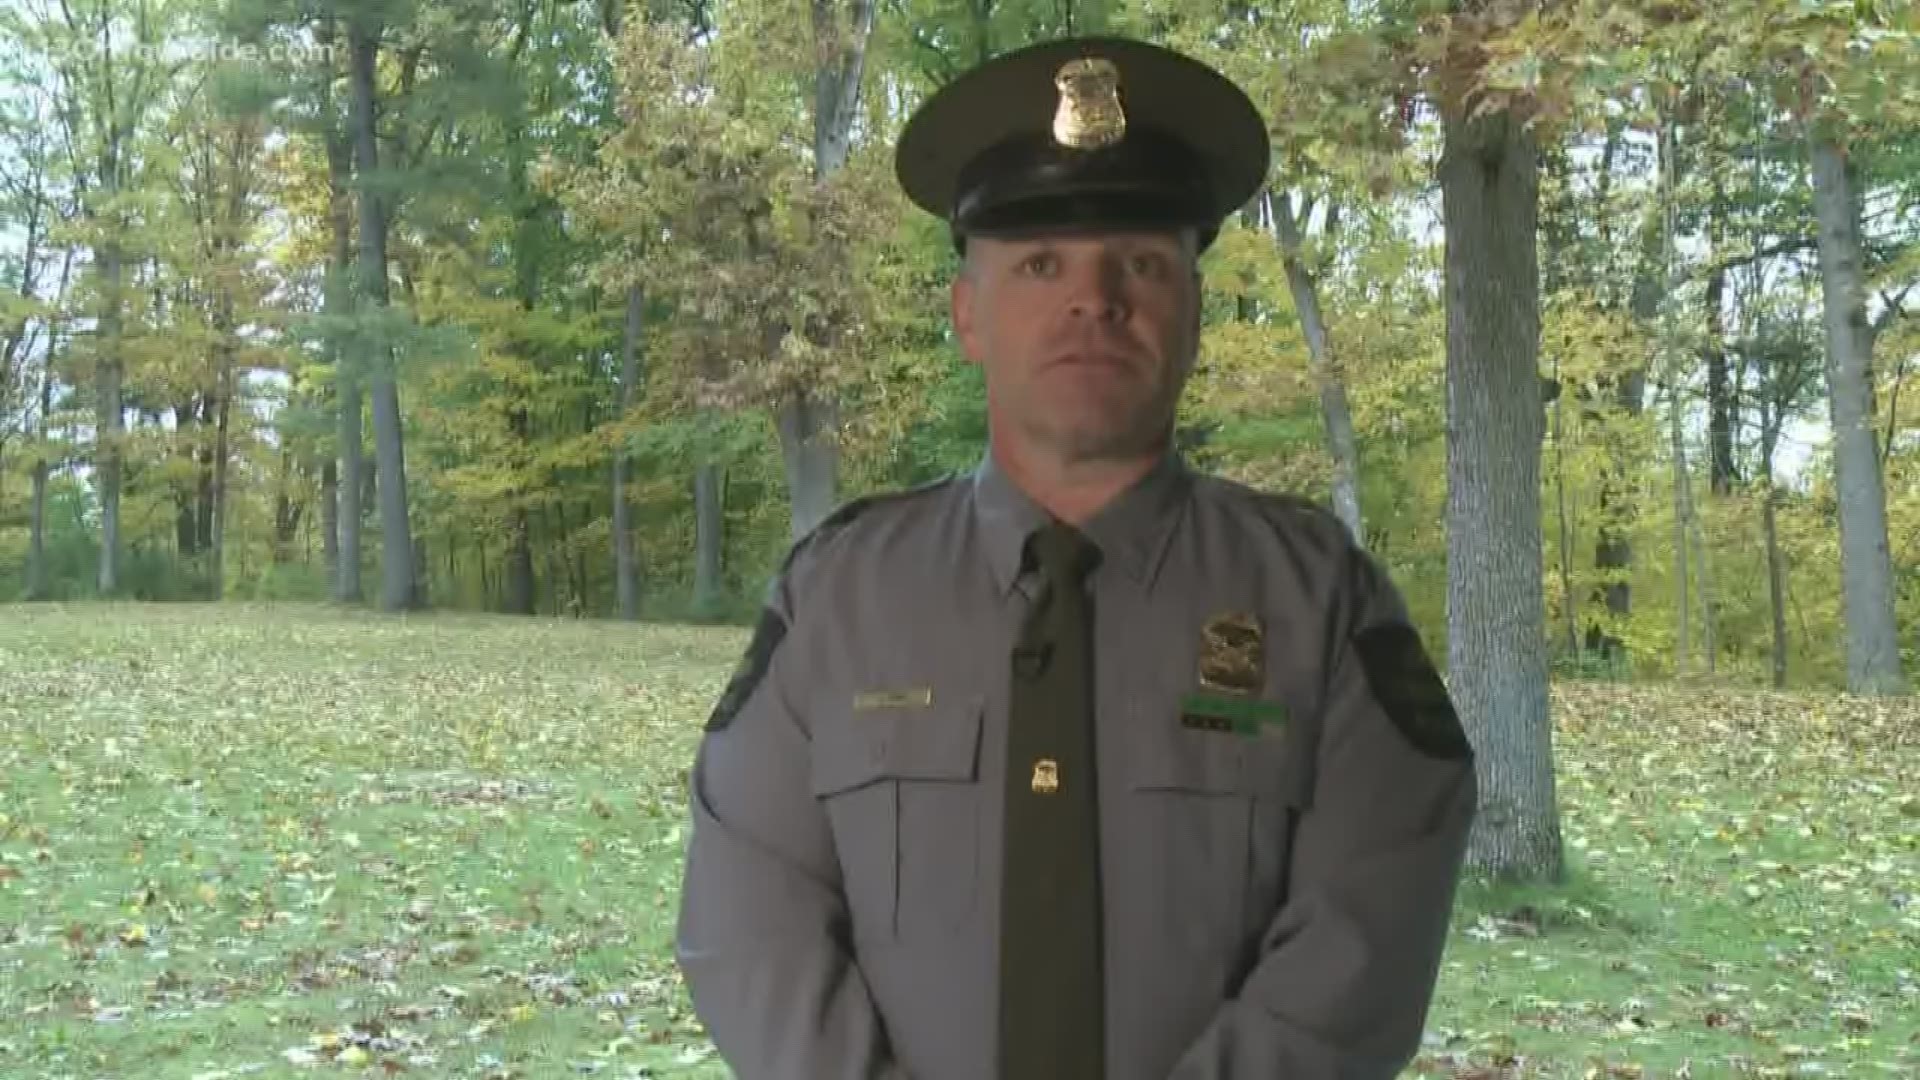 A Michigan DNR officer is being honored for his lifesaving efforts that have saved four people.